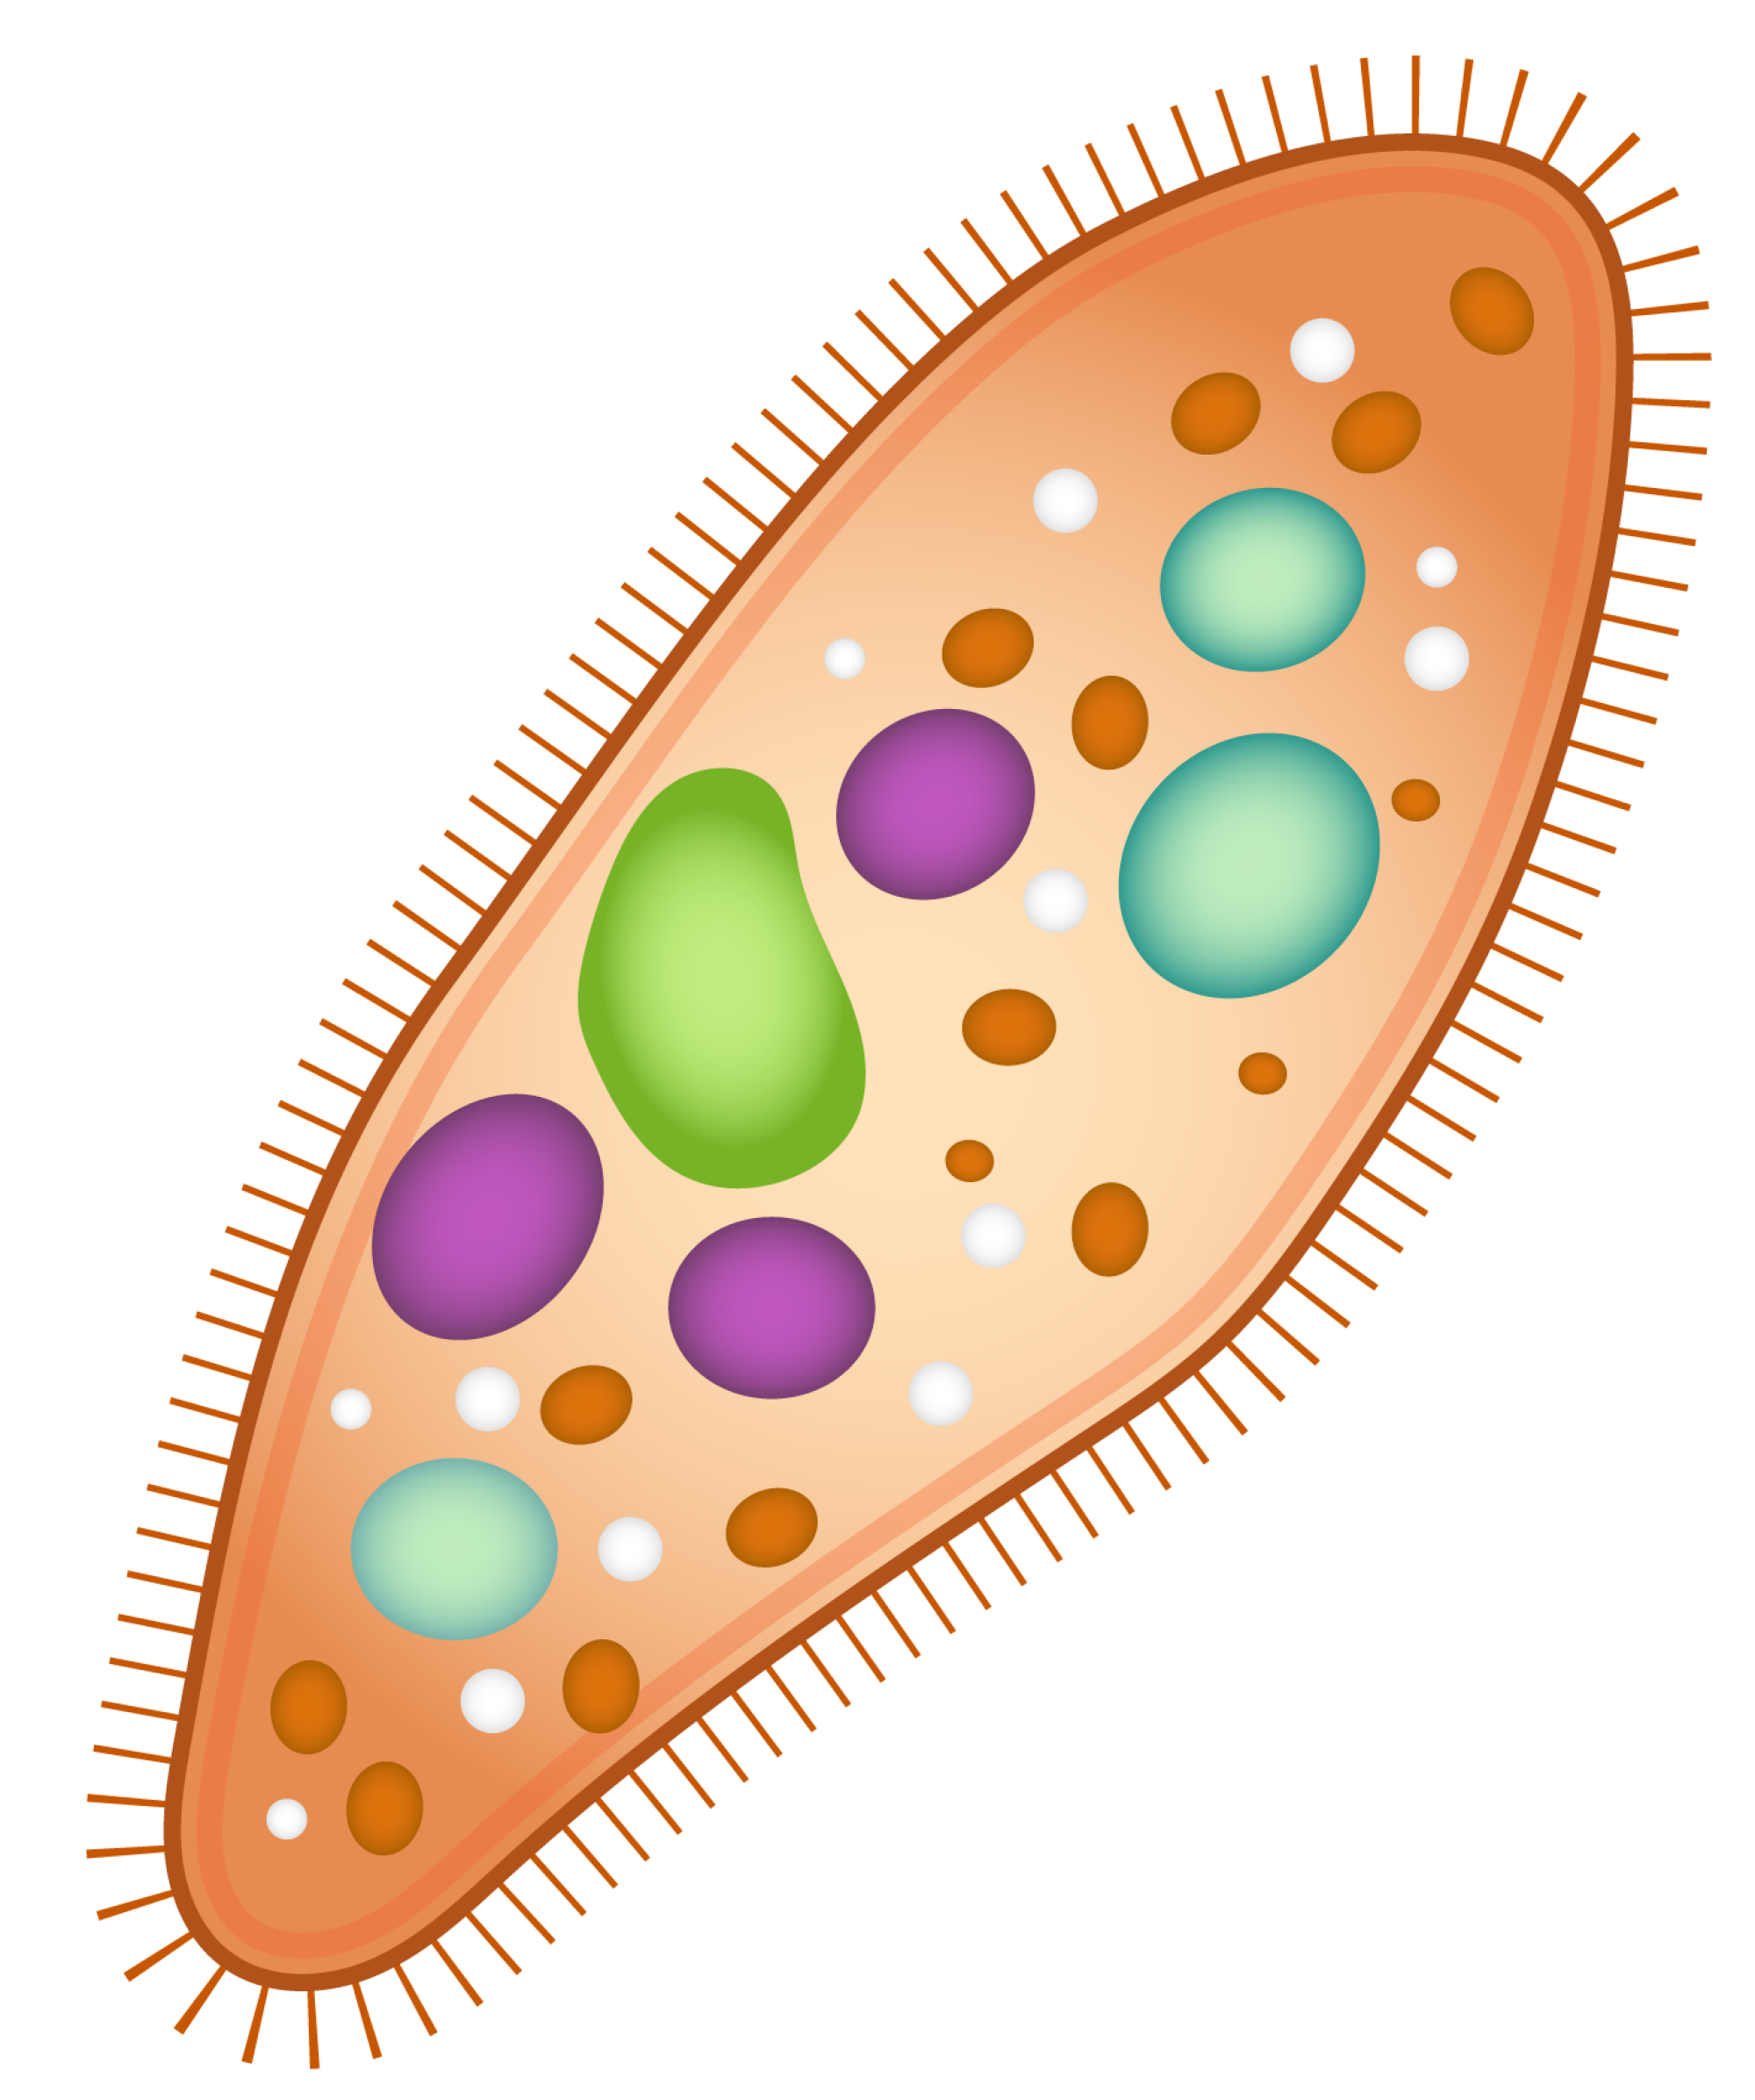 Most bodies of water contain paramecium. The emoji library could too.